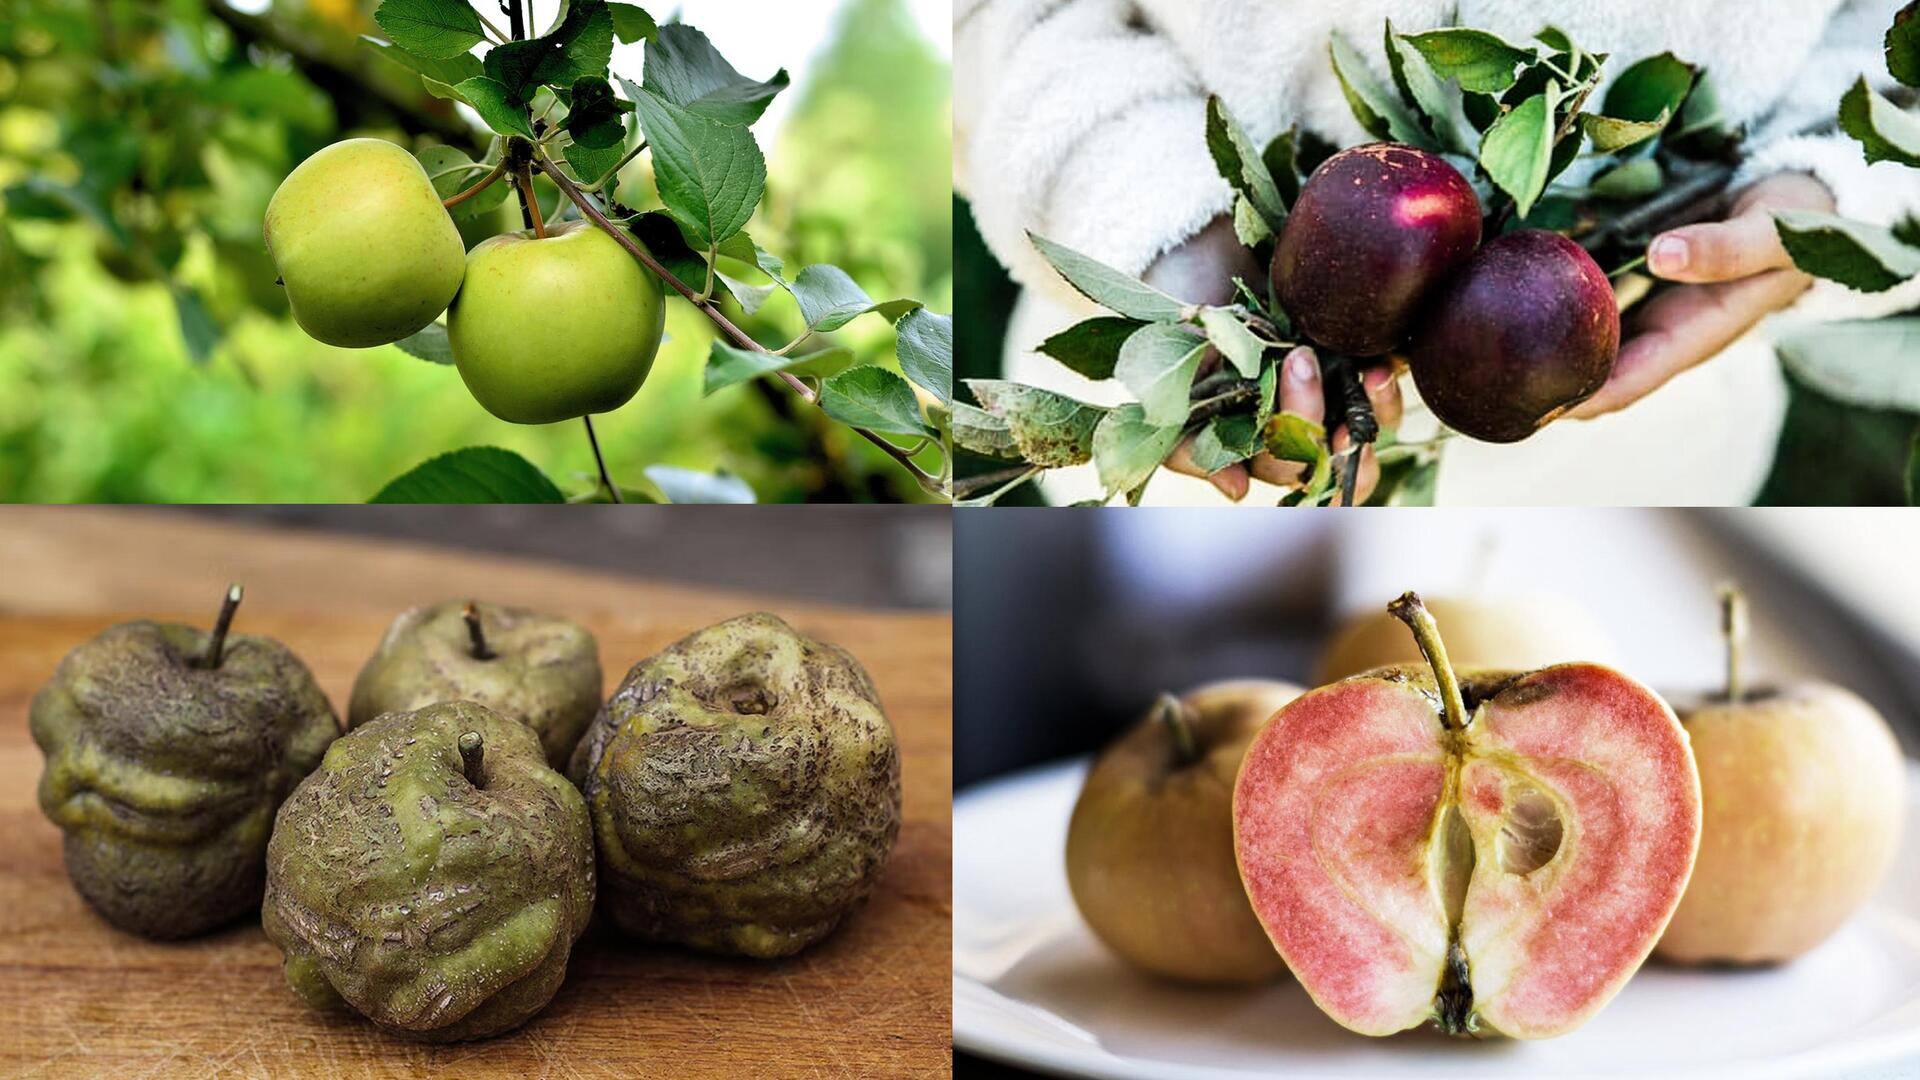 National Apple Month: Lesser-known apples that you didn't know existed